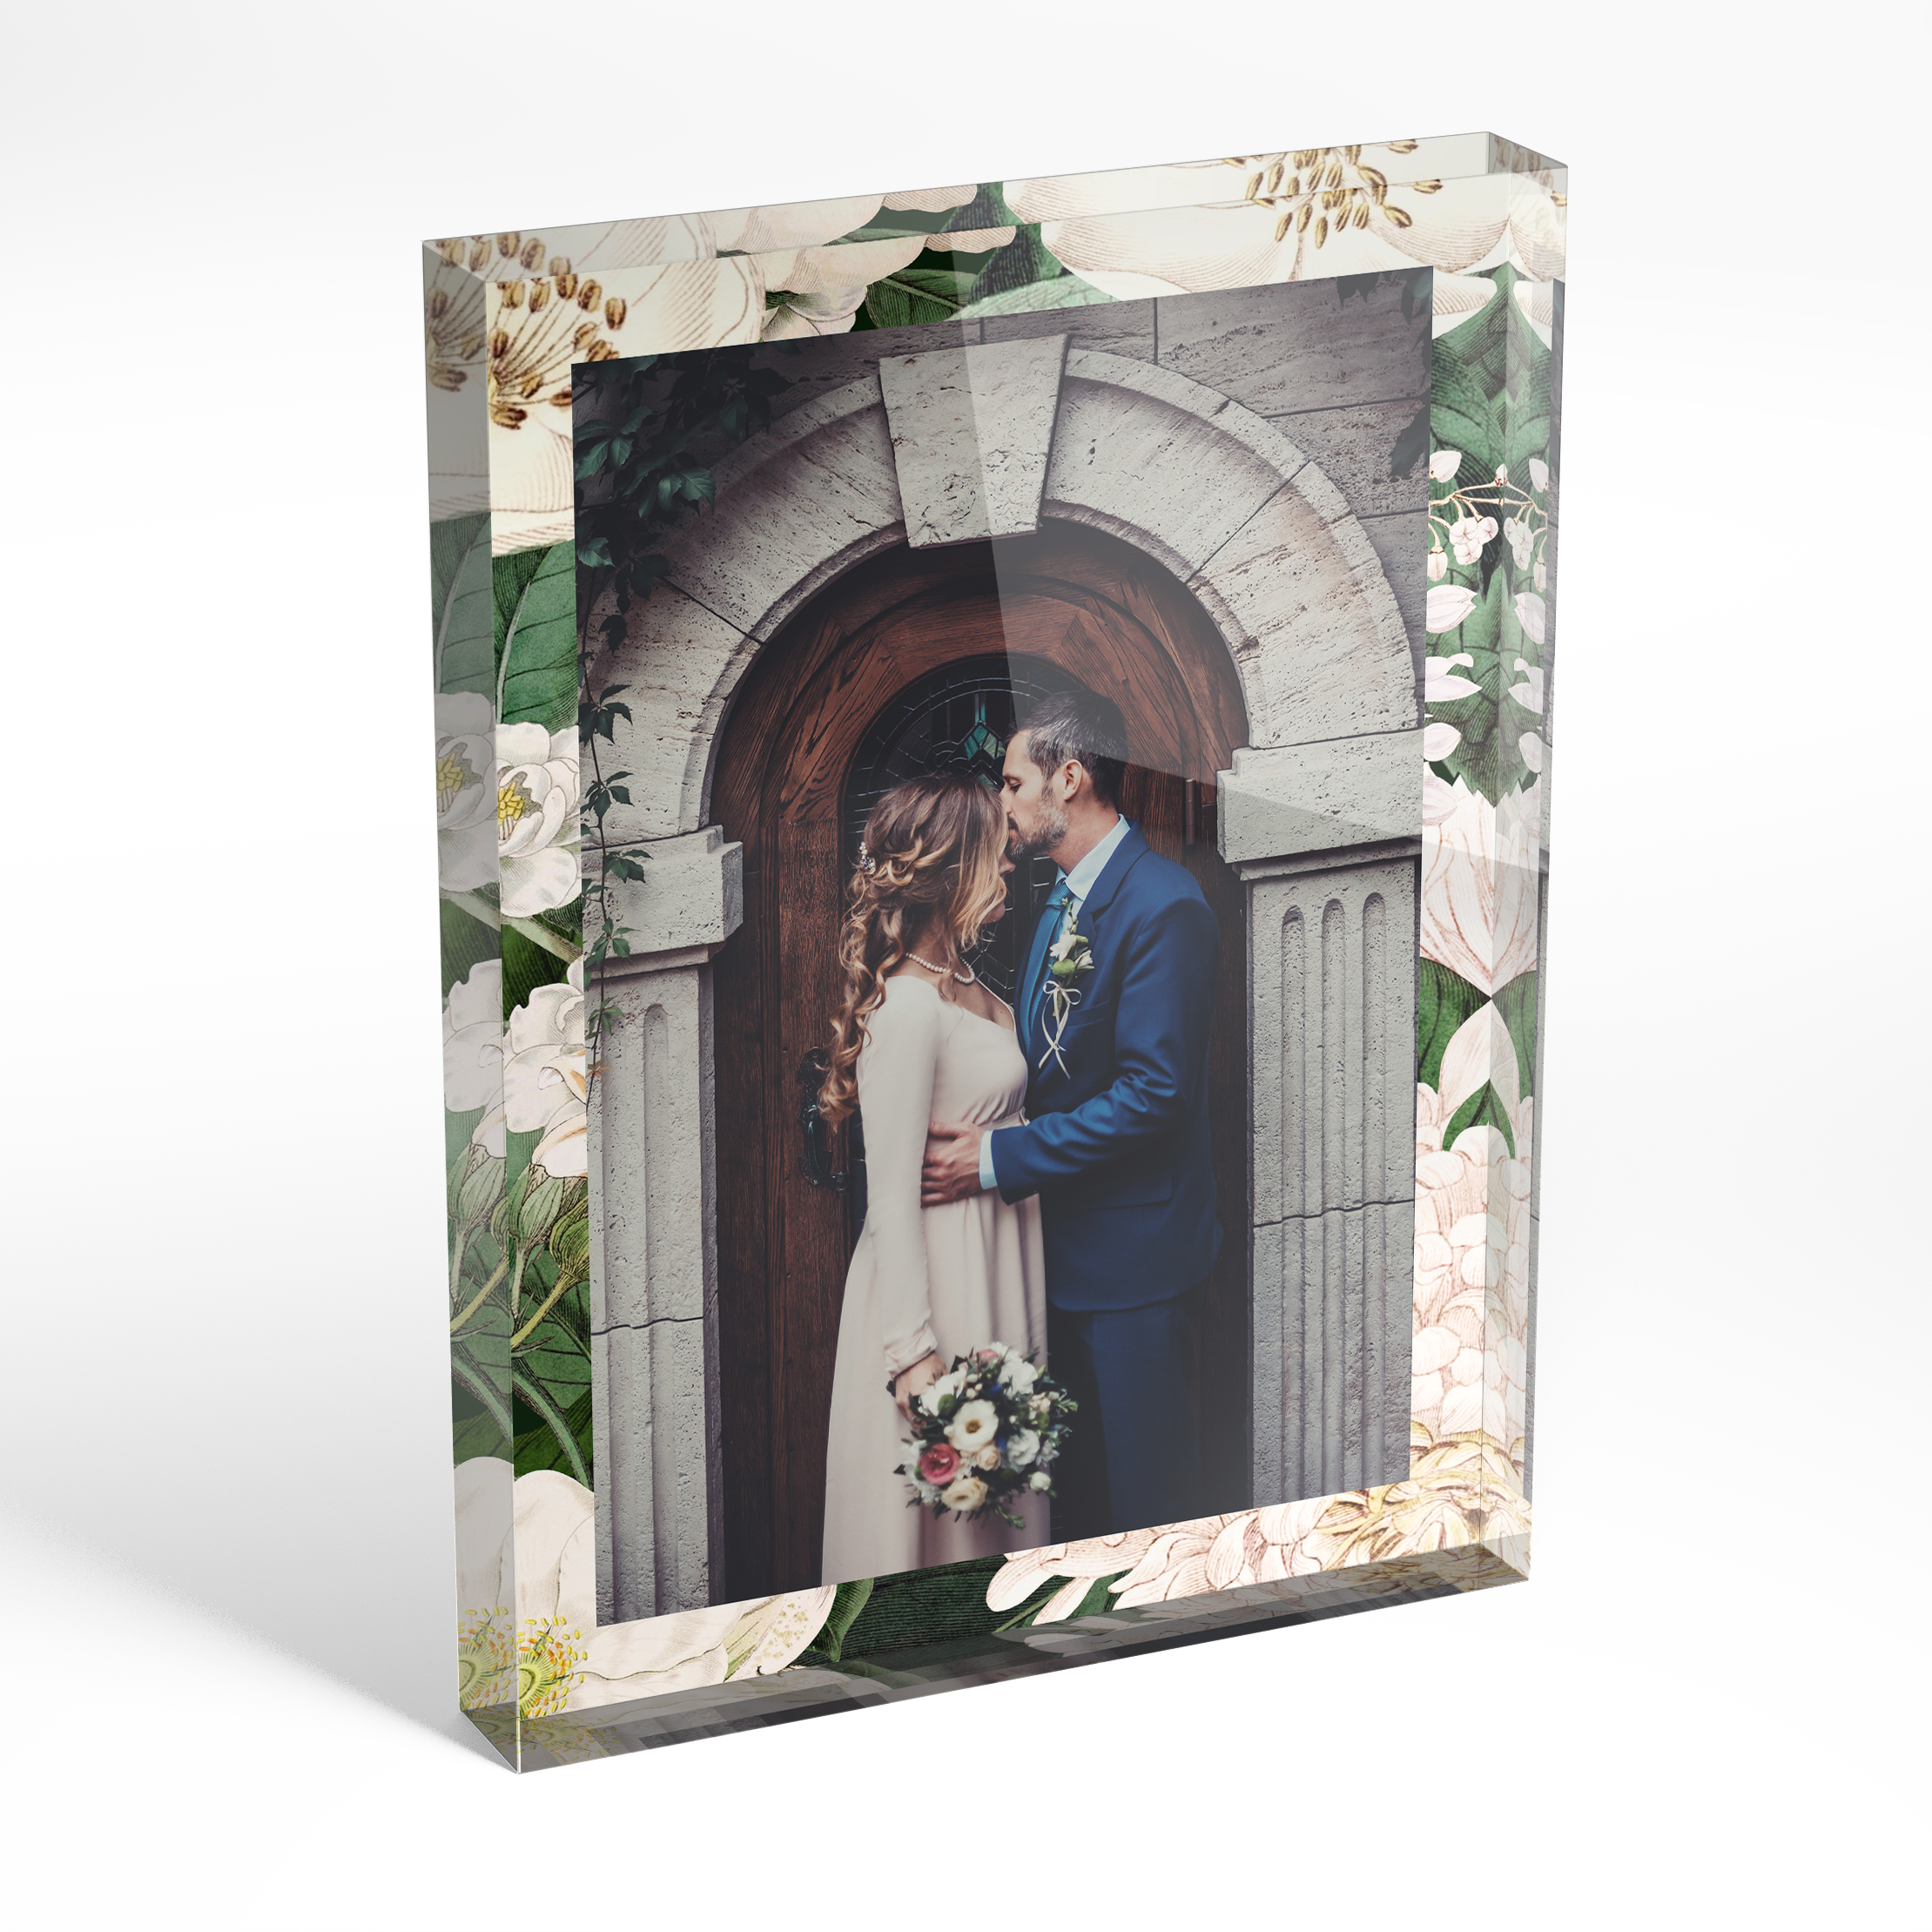 An angled side view of a portrait layout Acrylic Photo Gift with space for 1 photo. Thiis design is named "Everlasting Vow". 